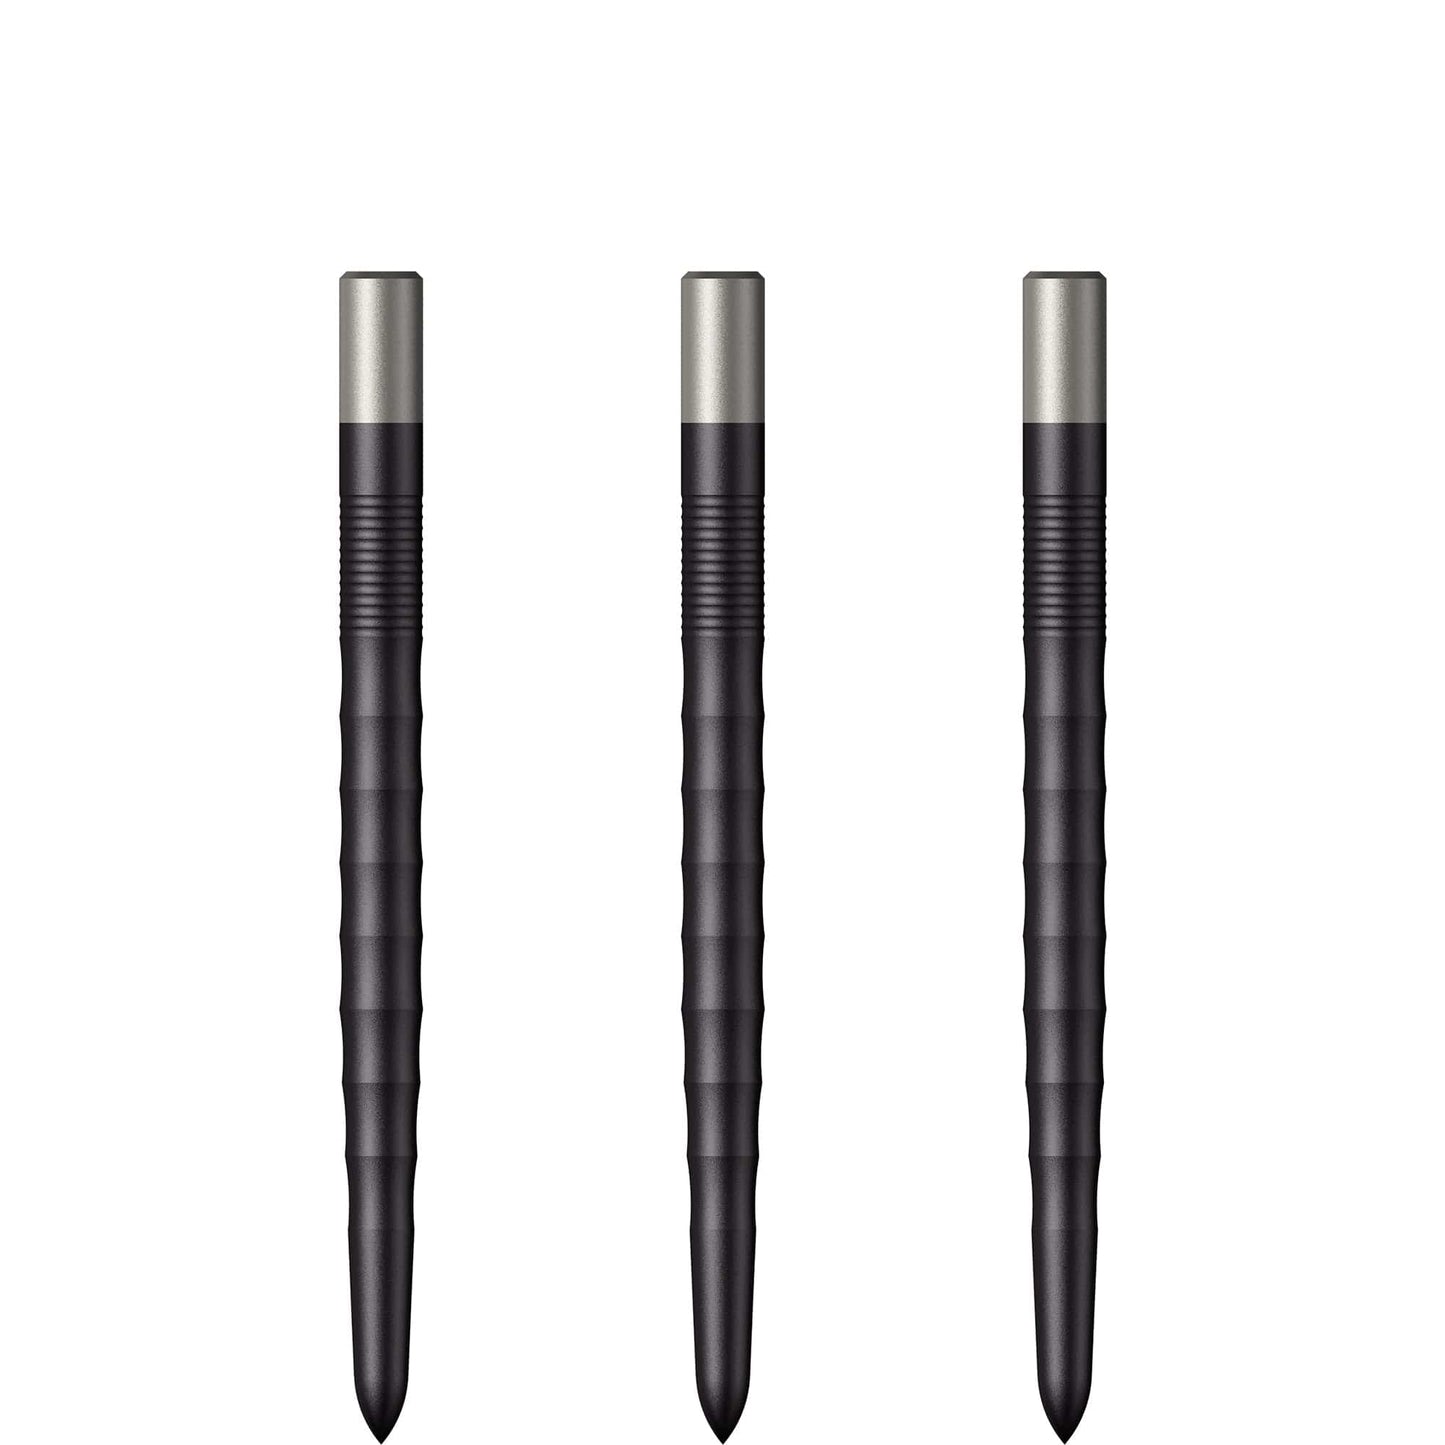 Mission Ripple Dart Points - Steel Tip Replacement Points - Black 32mm